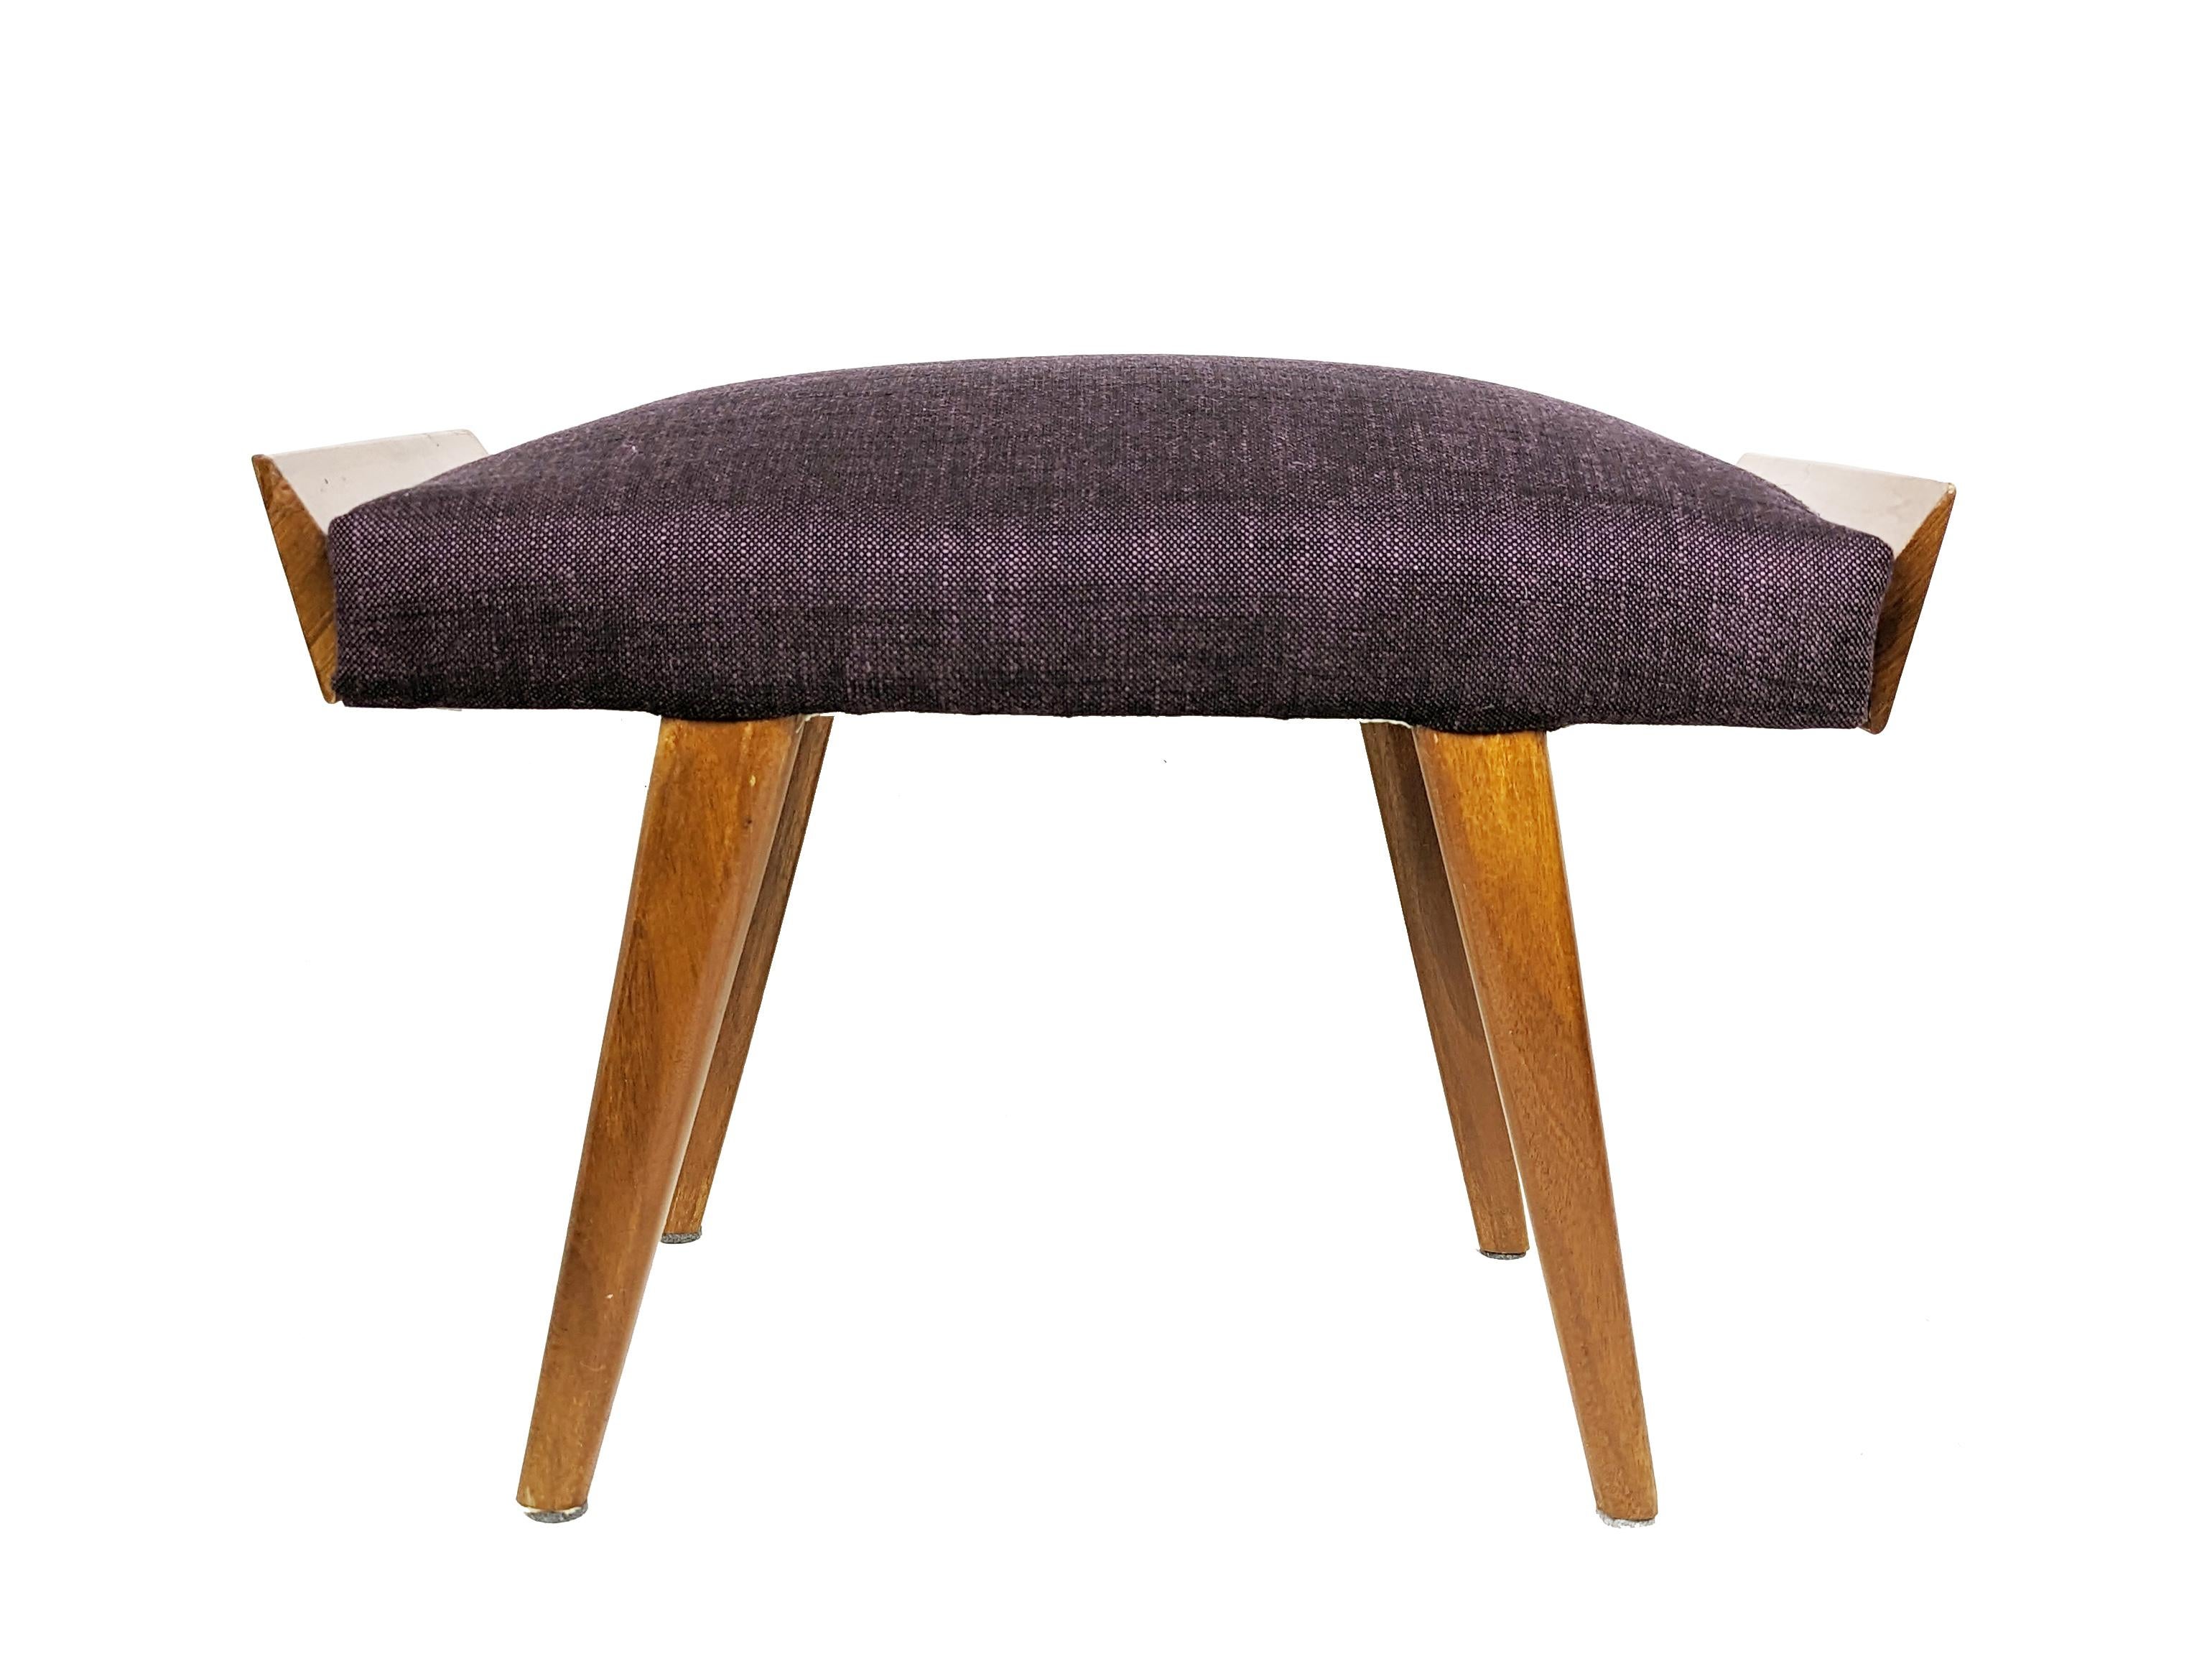 This stool features a wood frame and is reupholstered in purple fabric. Ideal as ottoman or serving stool.
Very good condition with reupholstered fabric seating. 